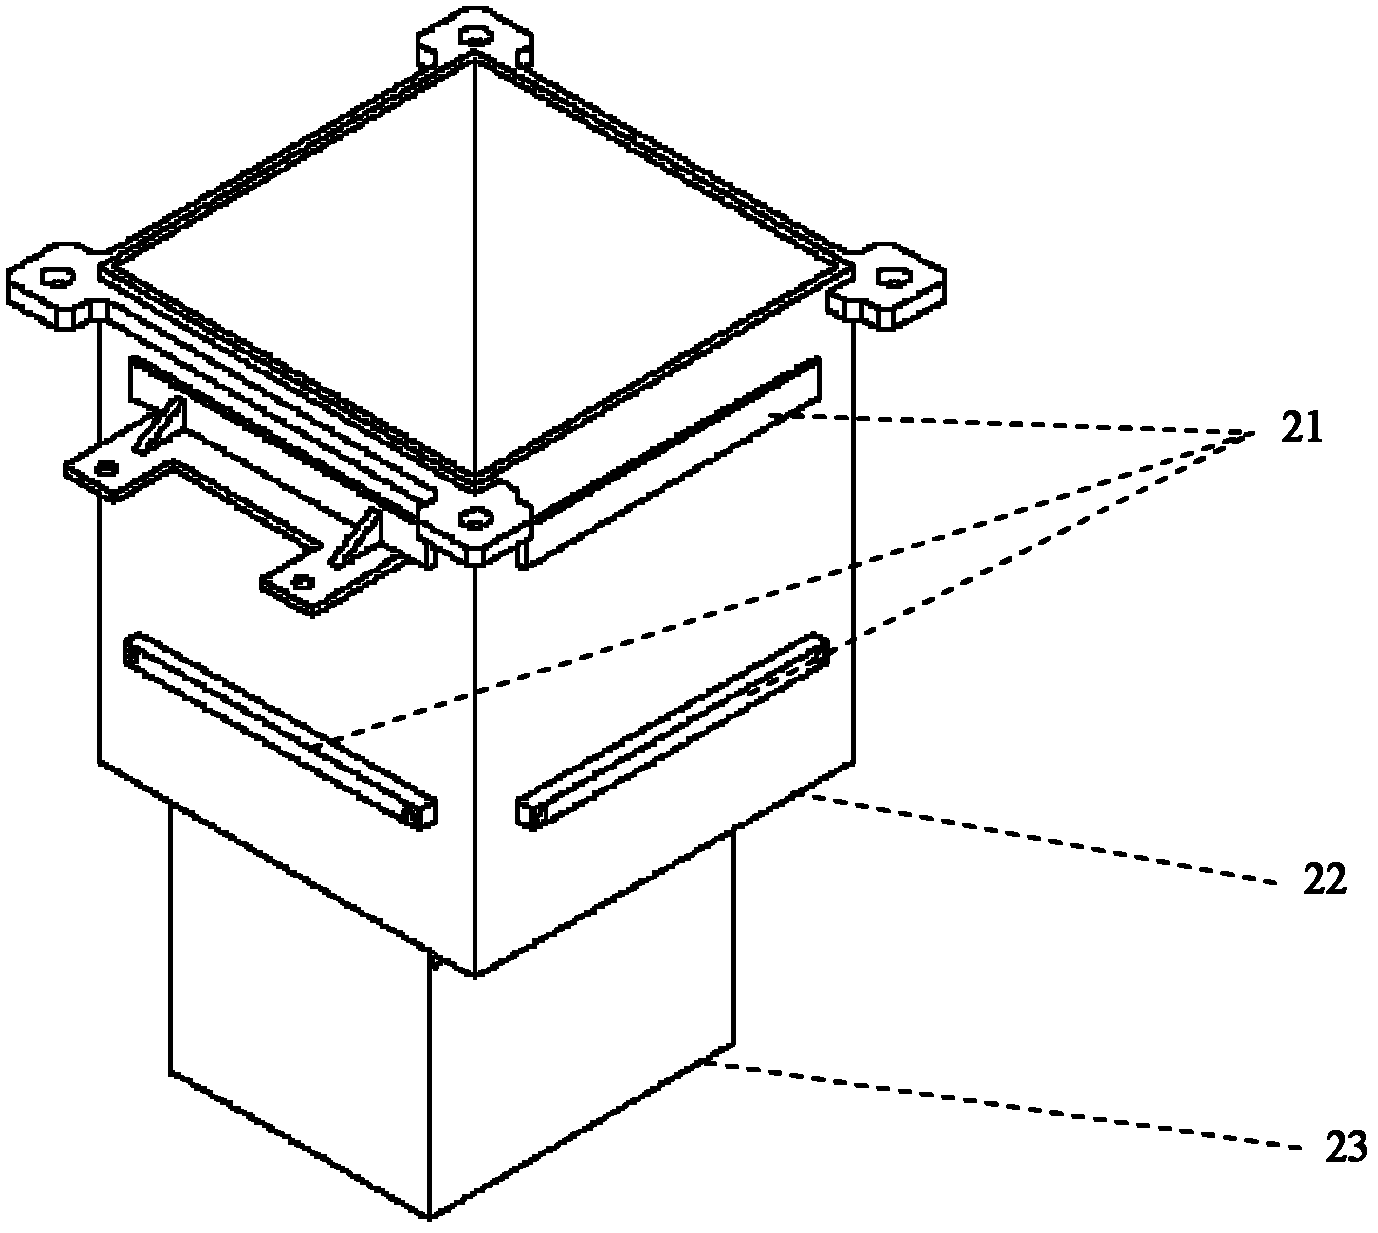 Gauze counting and detecting device